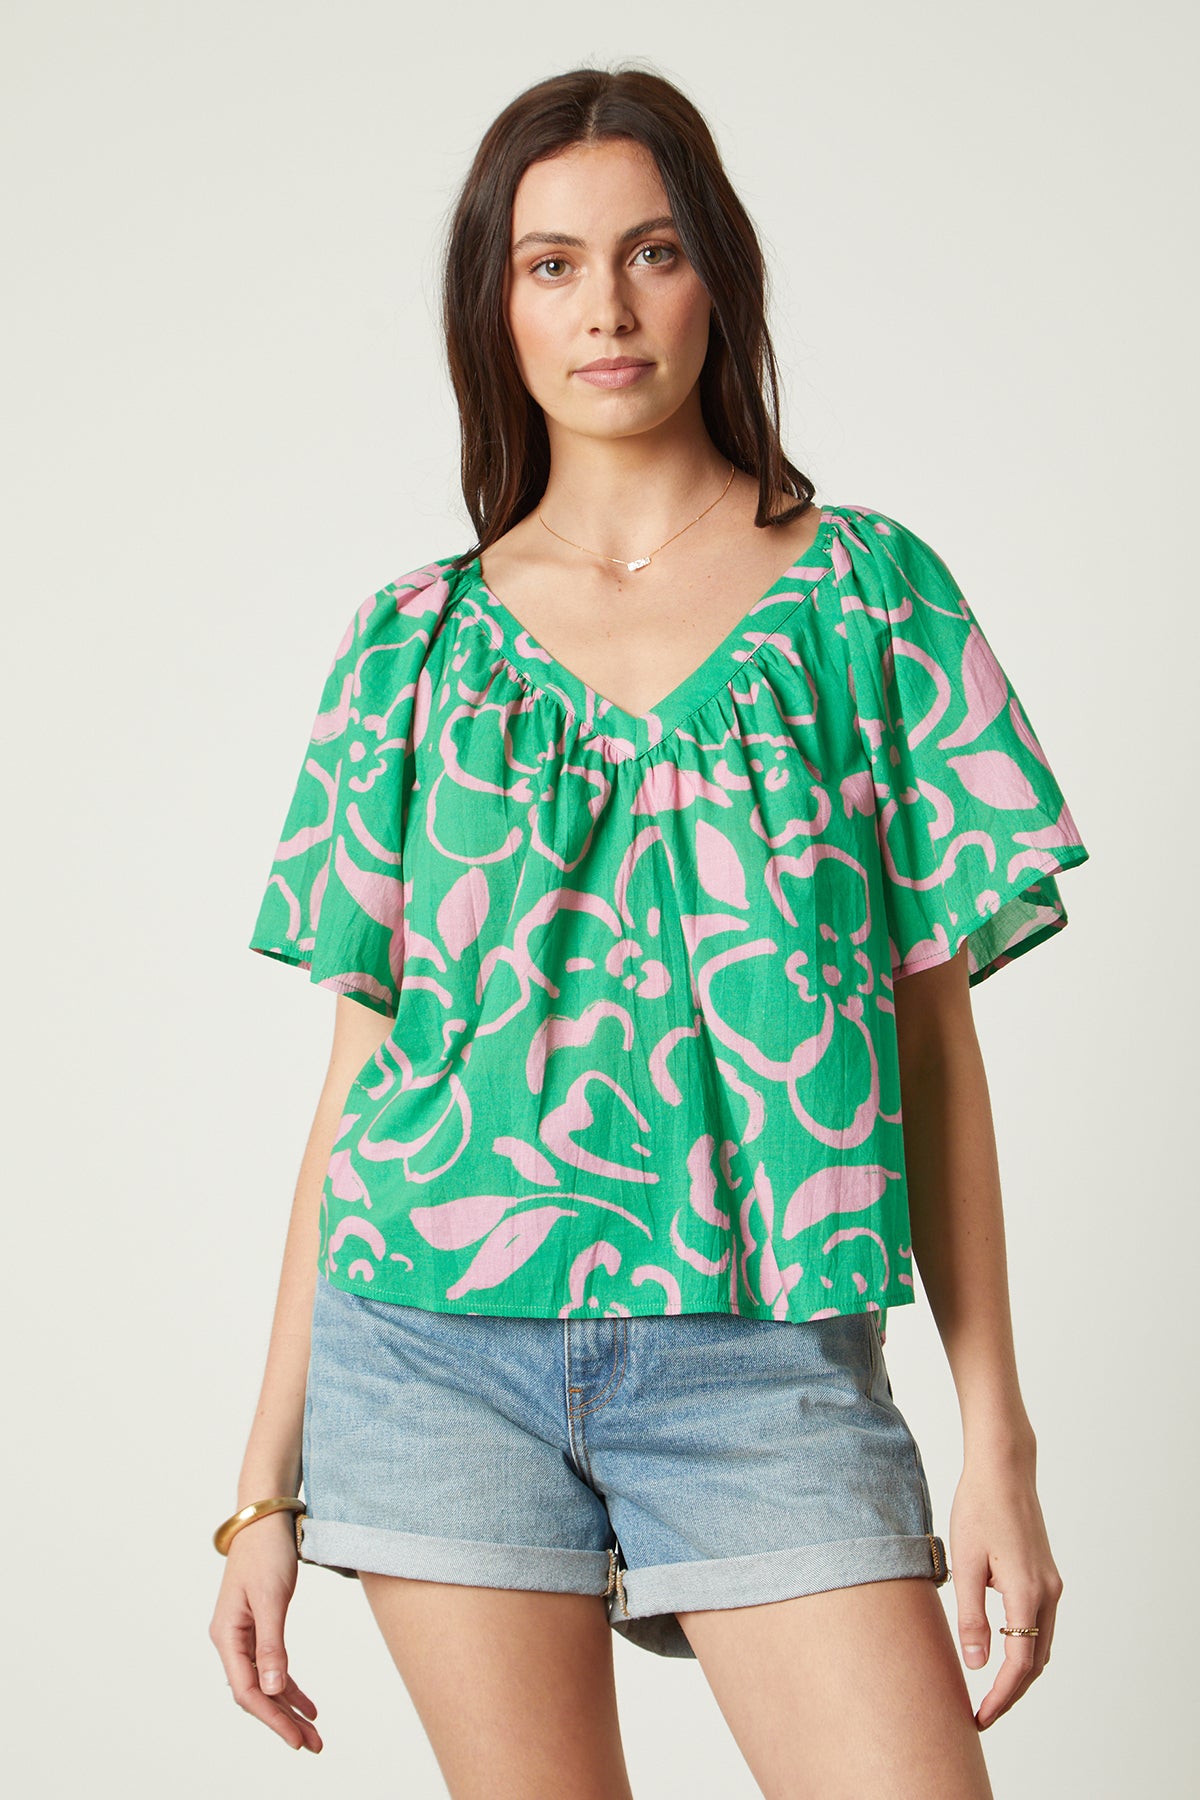 Liliana Top in print with green and pink front-25954340012225